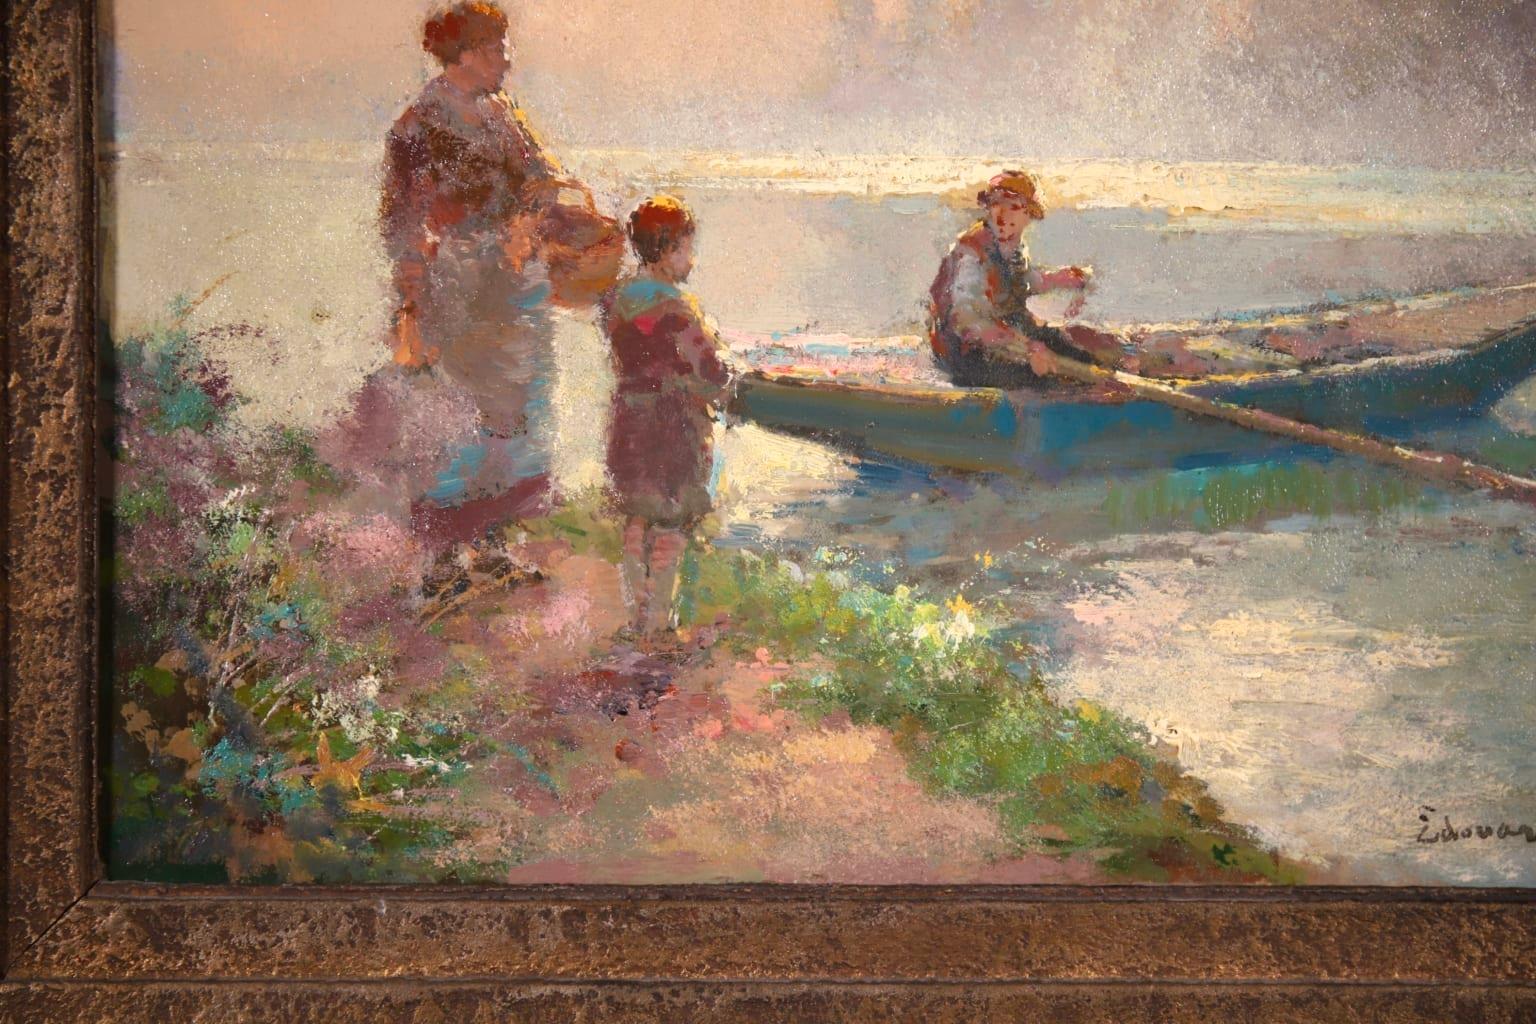 Le Passeur
A stunning oil on panel by sought after French Impressionist painter Edouard Leon Cortes. The piece depicts a sunny day on the river with a man on row boat with a lady and her son on the path beside him. The trees lining the banks reflect